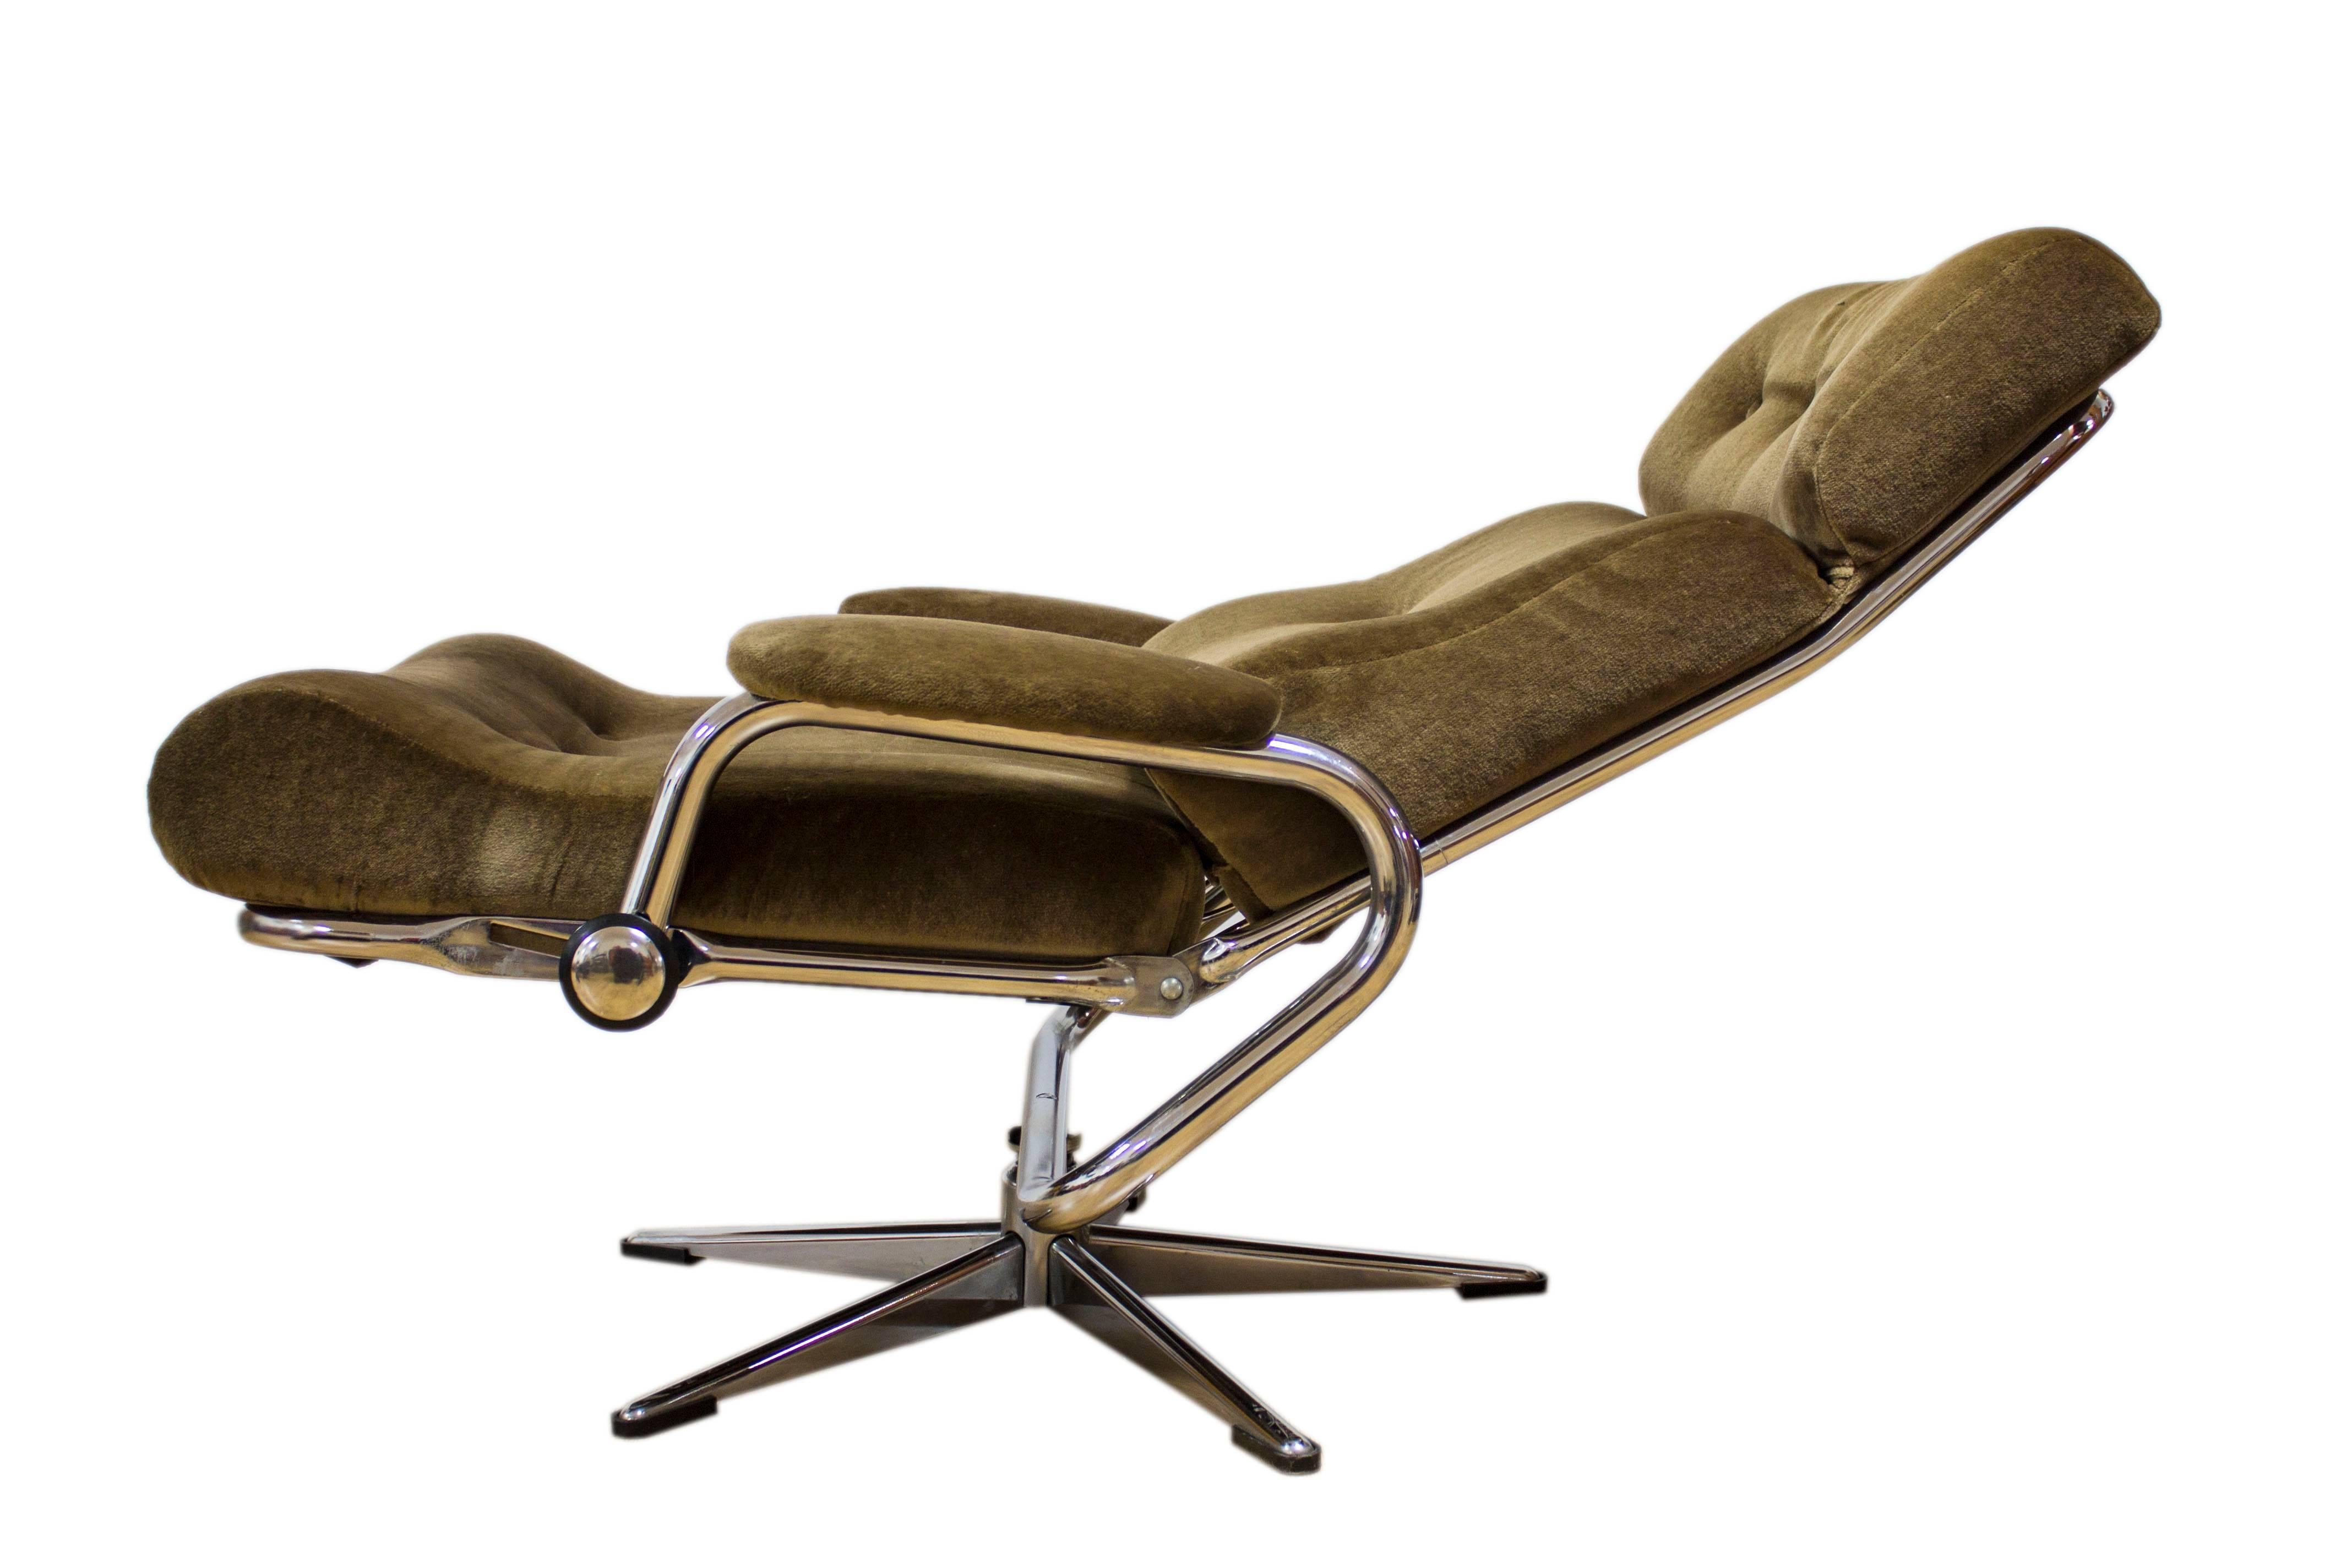 20th Century Danish Design Chrome and Fabric Recliner Armchairs Retro G Plan Eames Era For Sale